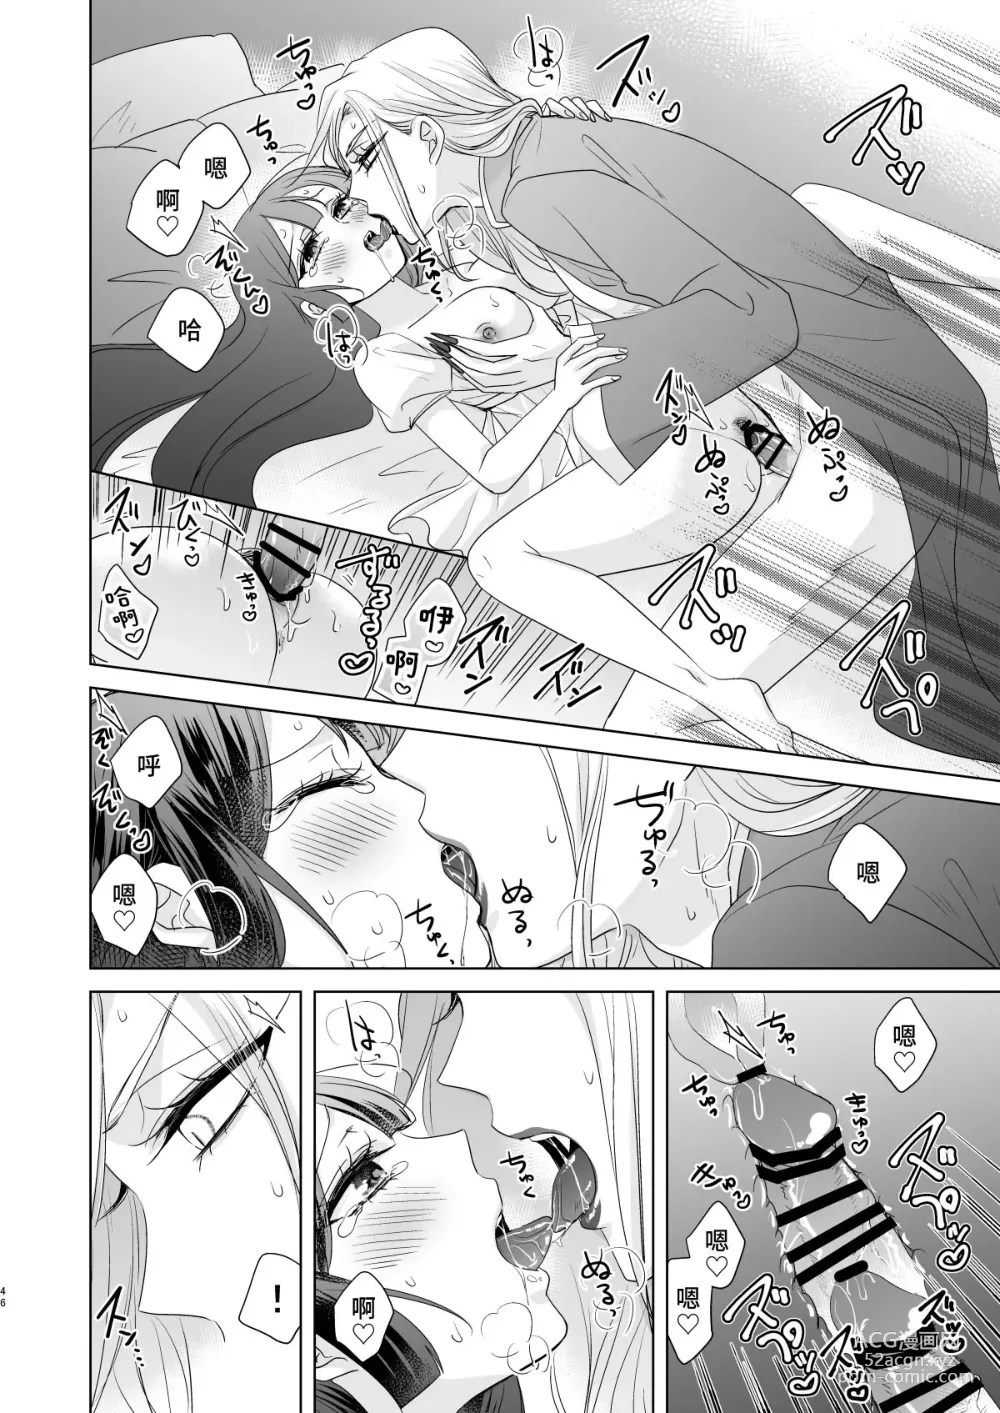 Page 45 of doujinshi 男大姐♂吸血鬼和少女